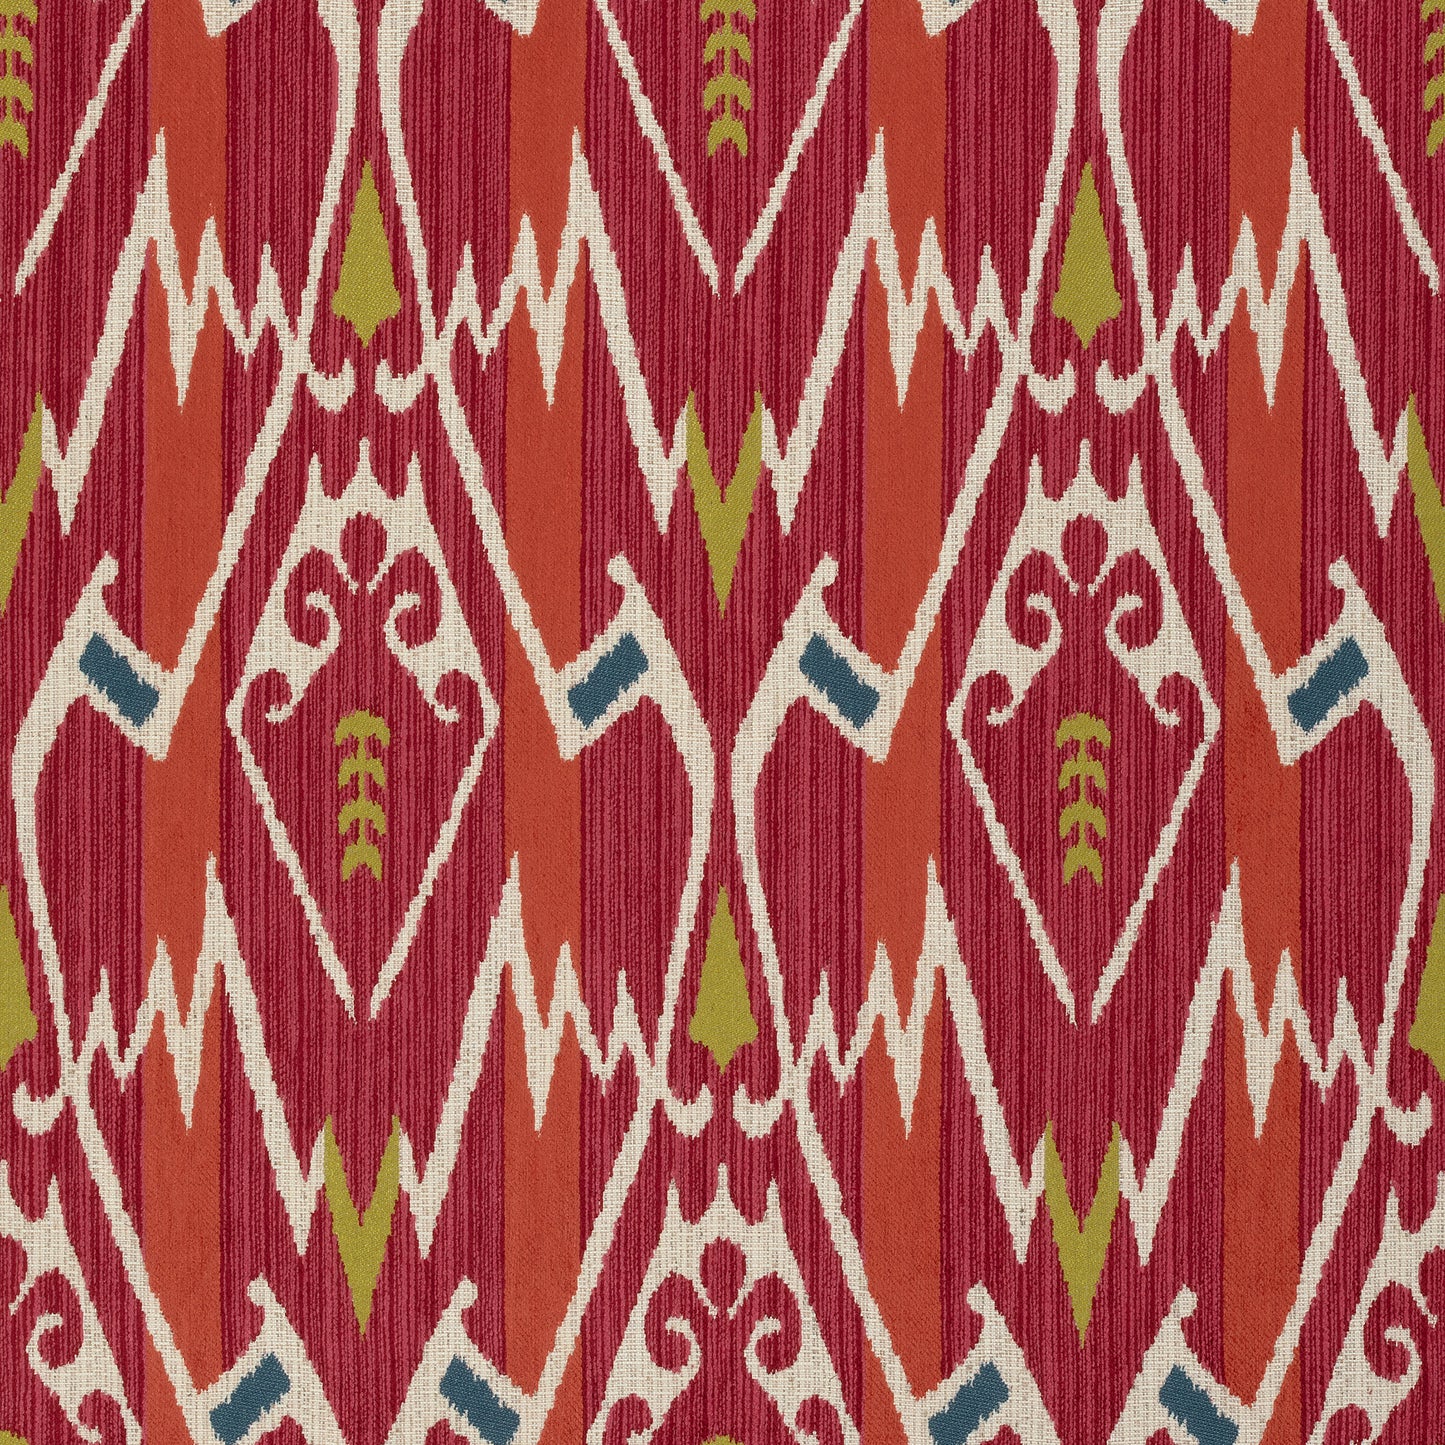 Purchase Thibaut Fabric SKU W73369 pattern name Nomad color Red